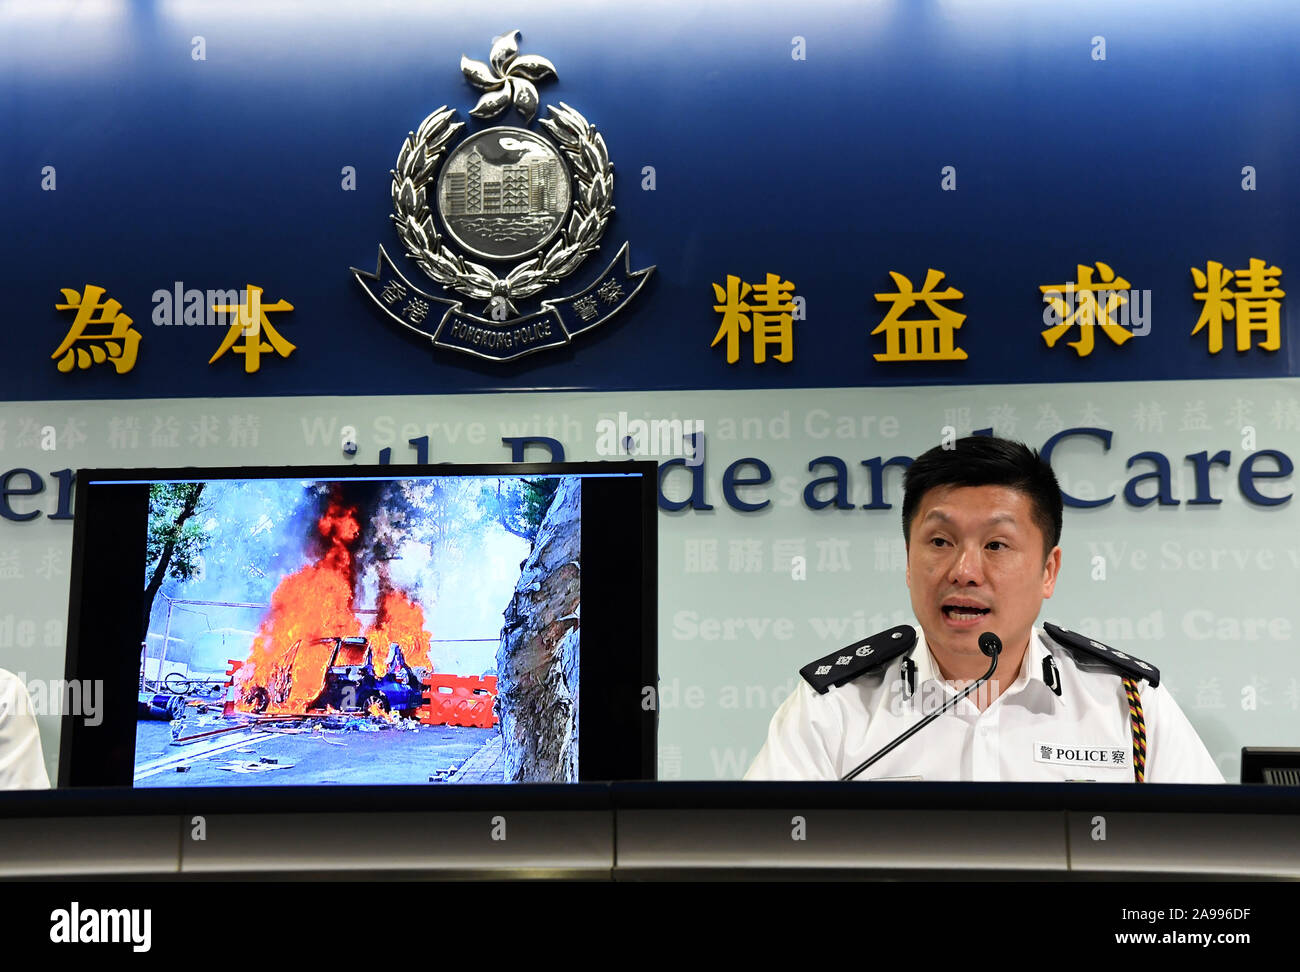 Hong Kong, China. 13th Nov, 2019. Chief Superintendent of Police Public Relations Branch Tse Chun-chung shows an evidence image of arson by rioters at a press conference in Hong Kong, south China, Nov. 13, 2019. Universities in Hong Kong are by no means a lawless frontier, and the police are legally responsible for taking actions against any law-breaking activities, Tse Chun-chung said. Credit: Zhu Xiang/Xinhua/Alamy Live News Stock Photo